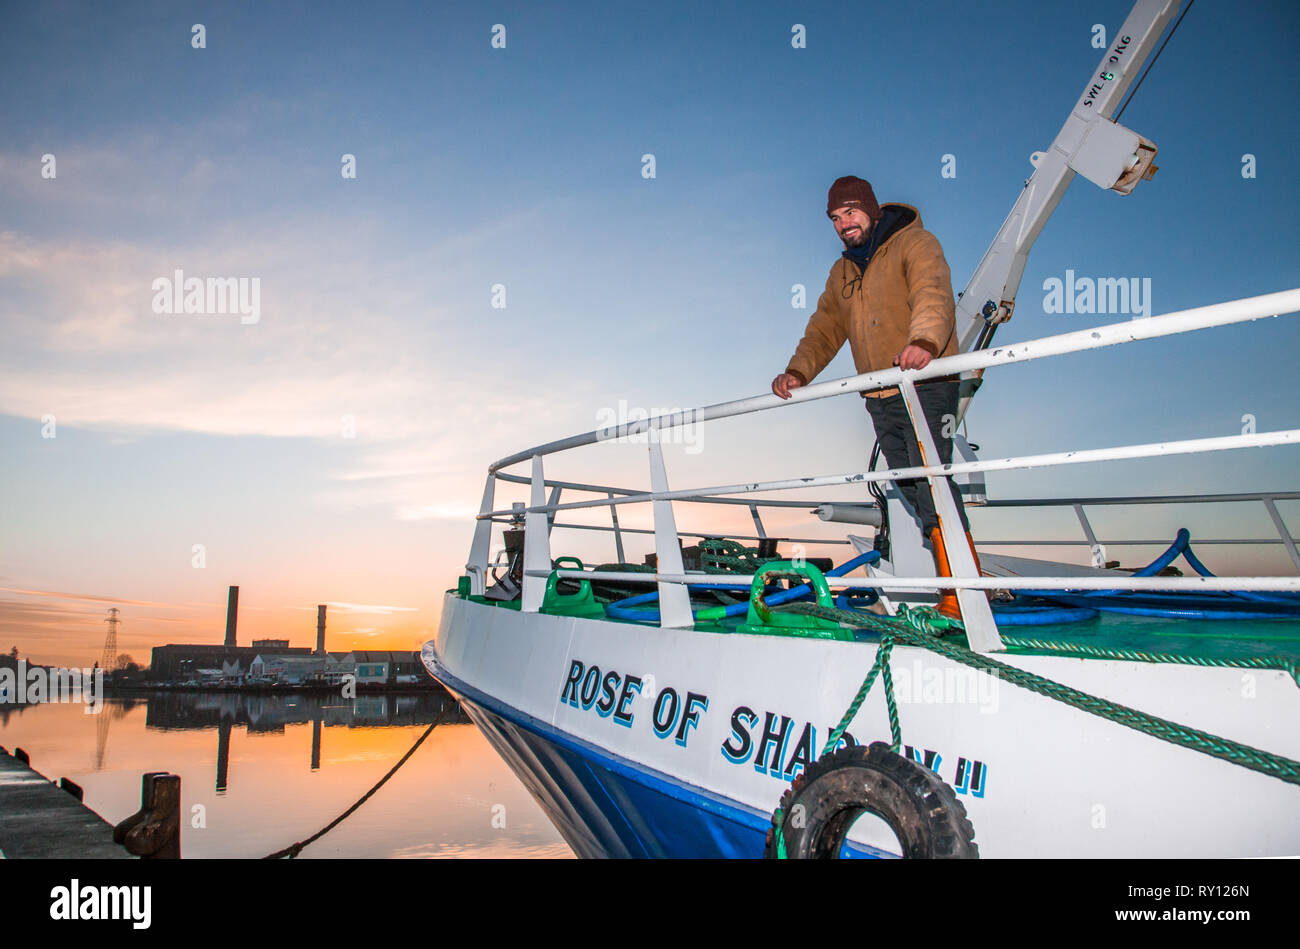 Cork City, Cork, Ireland. 11th March, 2019. Macdara Breathnach from Connemara and Skipper of the trawler Rose of Sharon, stands on the deck watching the unloading of Prawns that are bound for export at Horgan's Quay, Cork City, Ireland. Credit: David Creedon/Alamy Live News Stock Photo